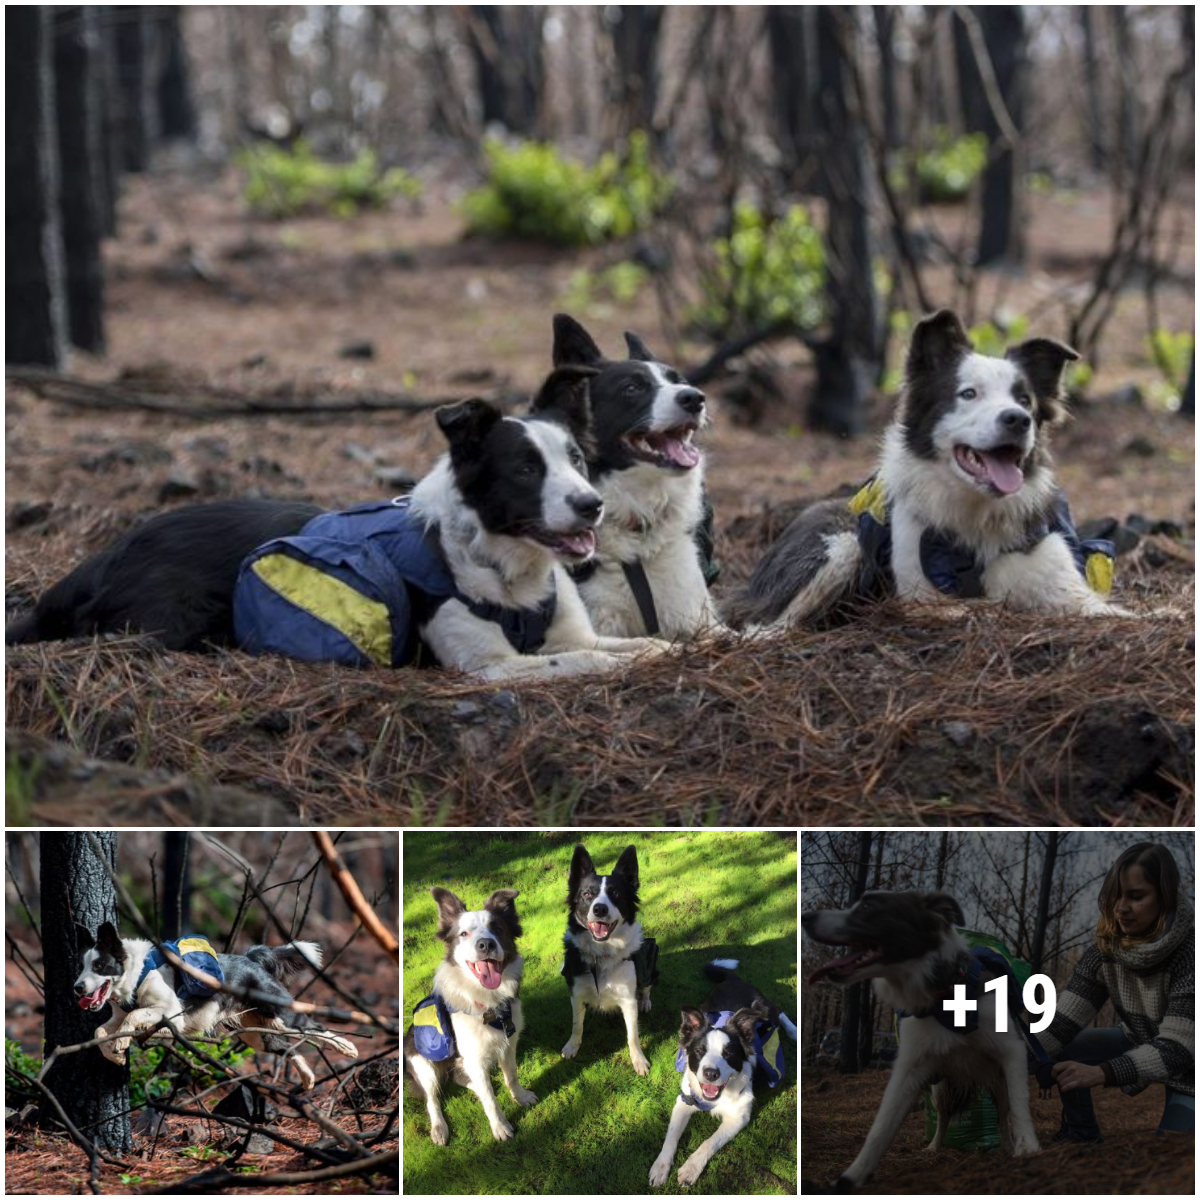 After the wildfires in Chile, specially trained border collies reseeded the land, winning trust and a lot of admiration